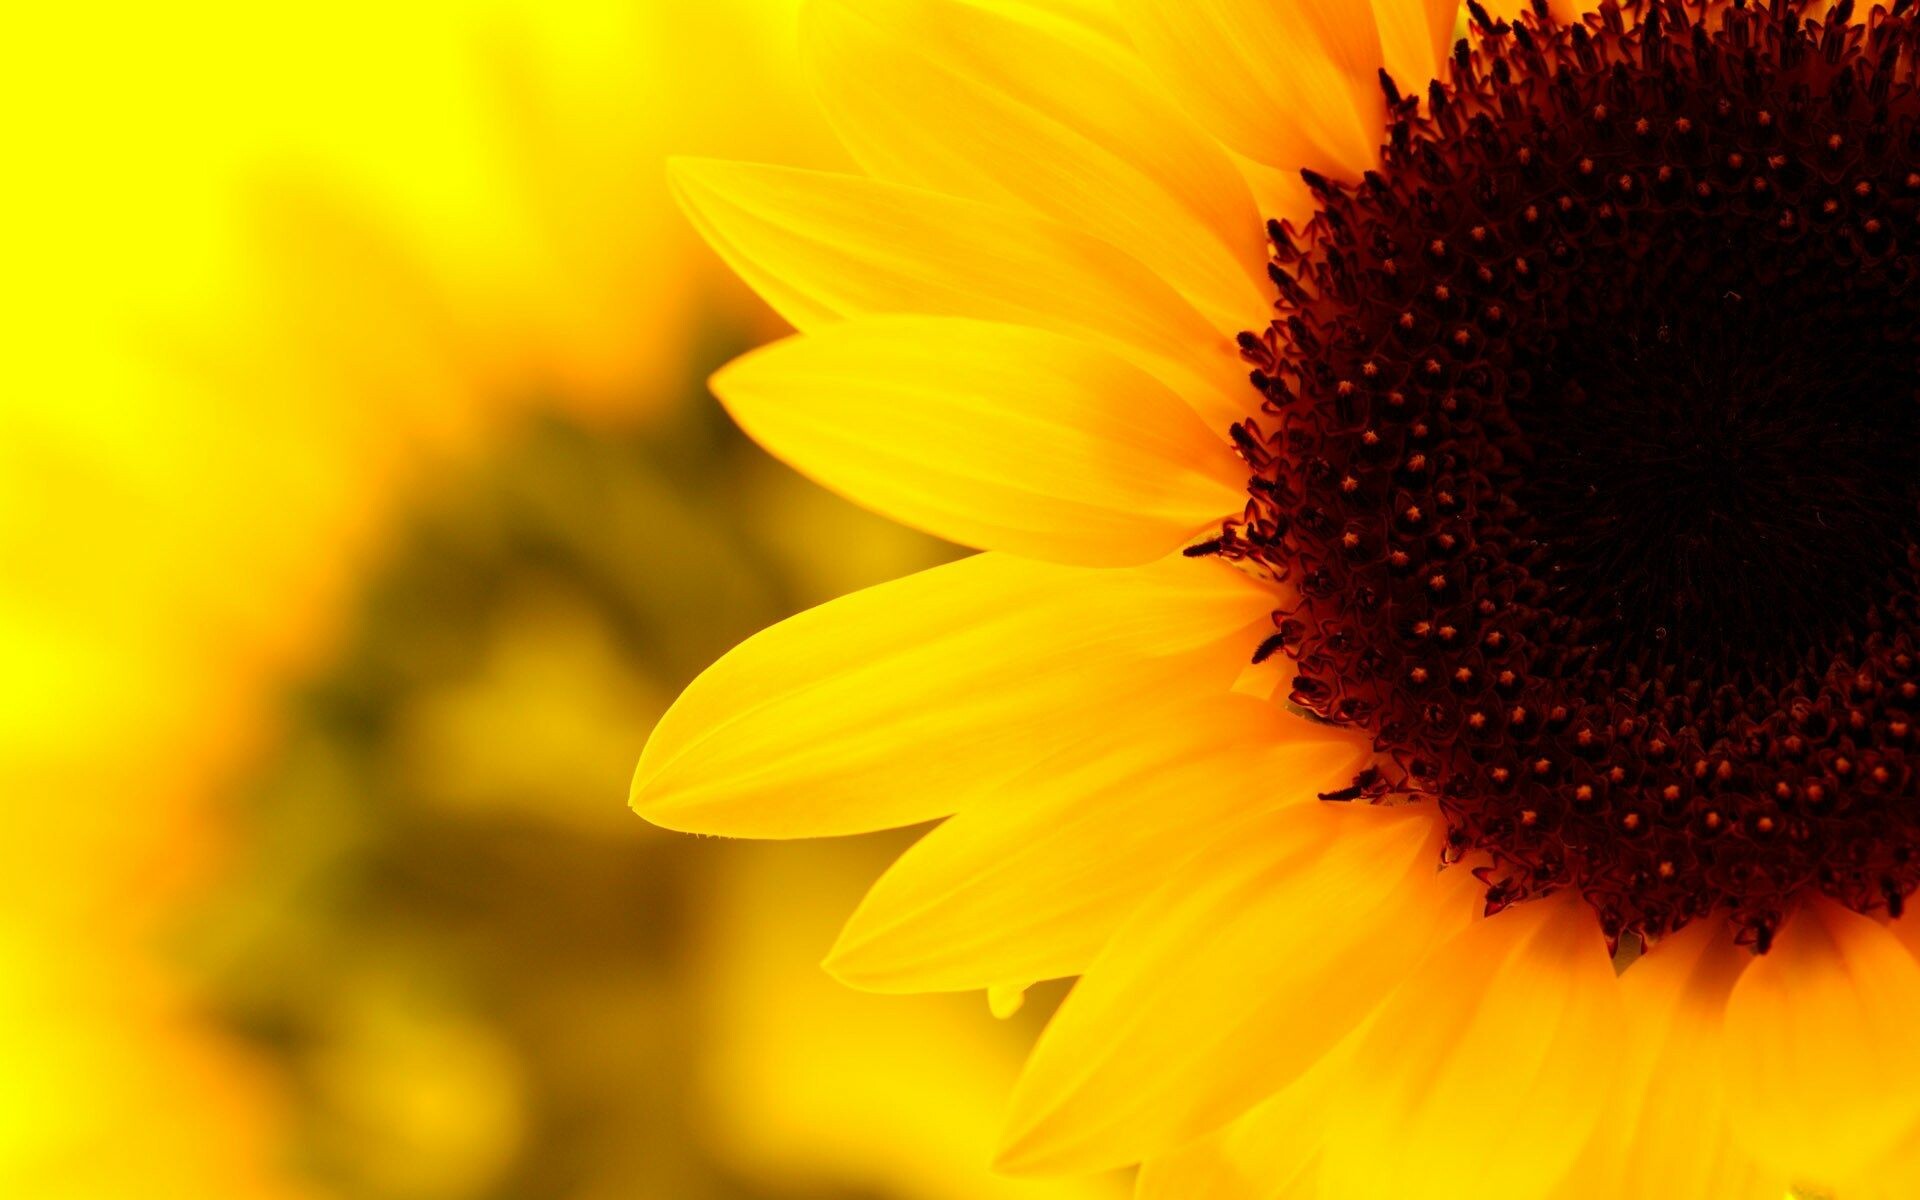 Sunflower: Flowering plant, Annual plant, Close-up, Aesthetic. 1920x1200 HD Wallpaper.